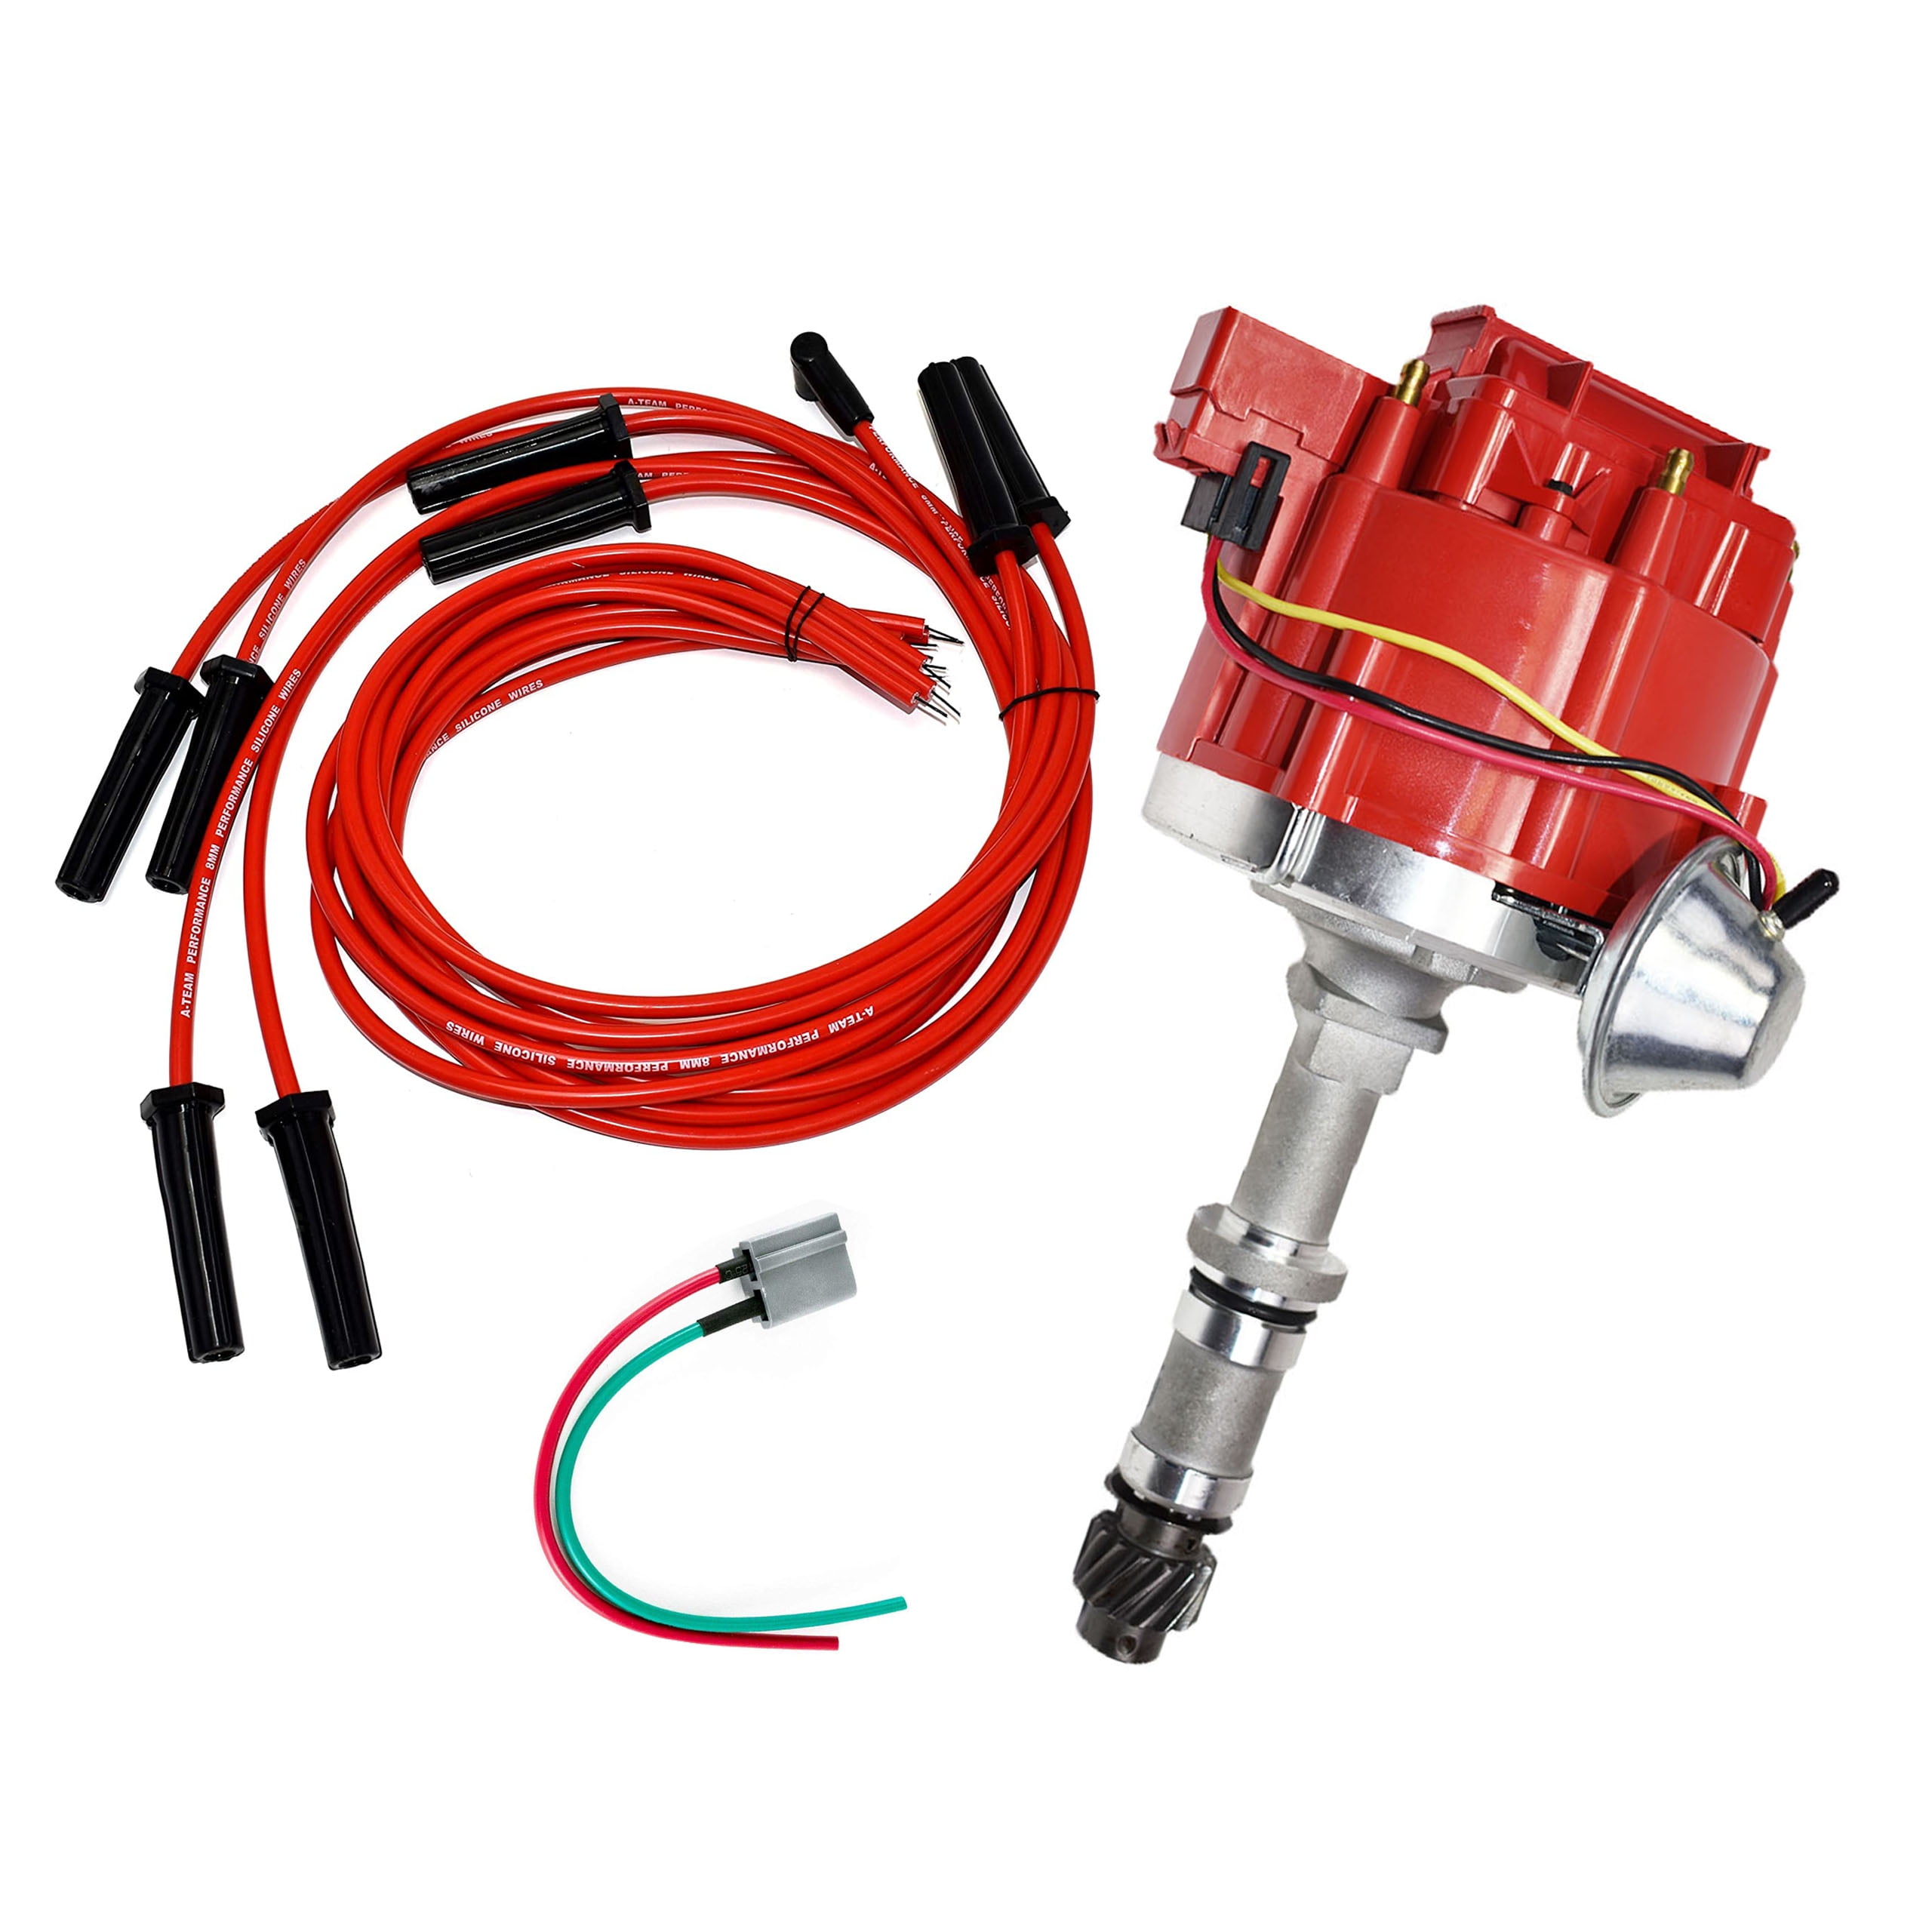 A-Team Performance HEI Distributor, 8.0mm Spark Plug Wires, and  Battery-Pigtail Harness Kit For Buick Odd Fire 231 3.8L V6 225 Jeep 3.7L  Dauntless Red Cap 